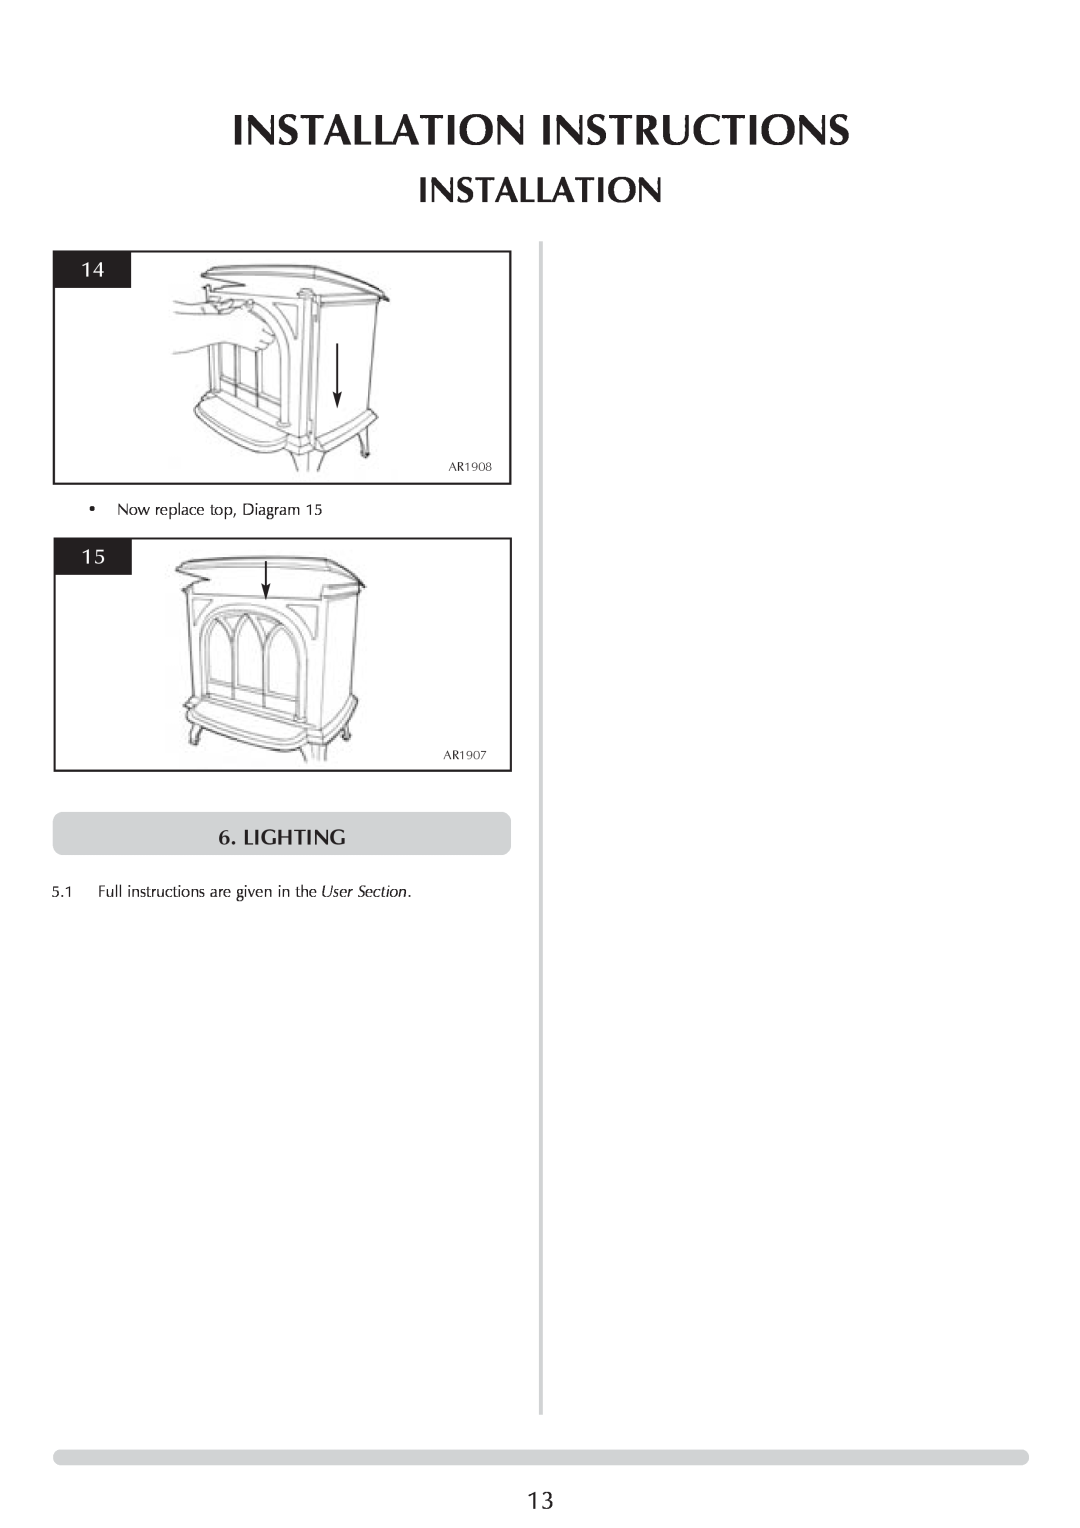 Stovax Huntingdon 30 manual Installation Instructions, Lighting, Now replace top, Diagram 